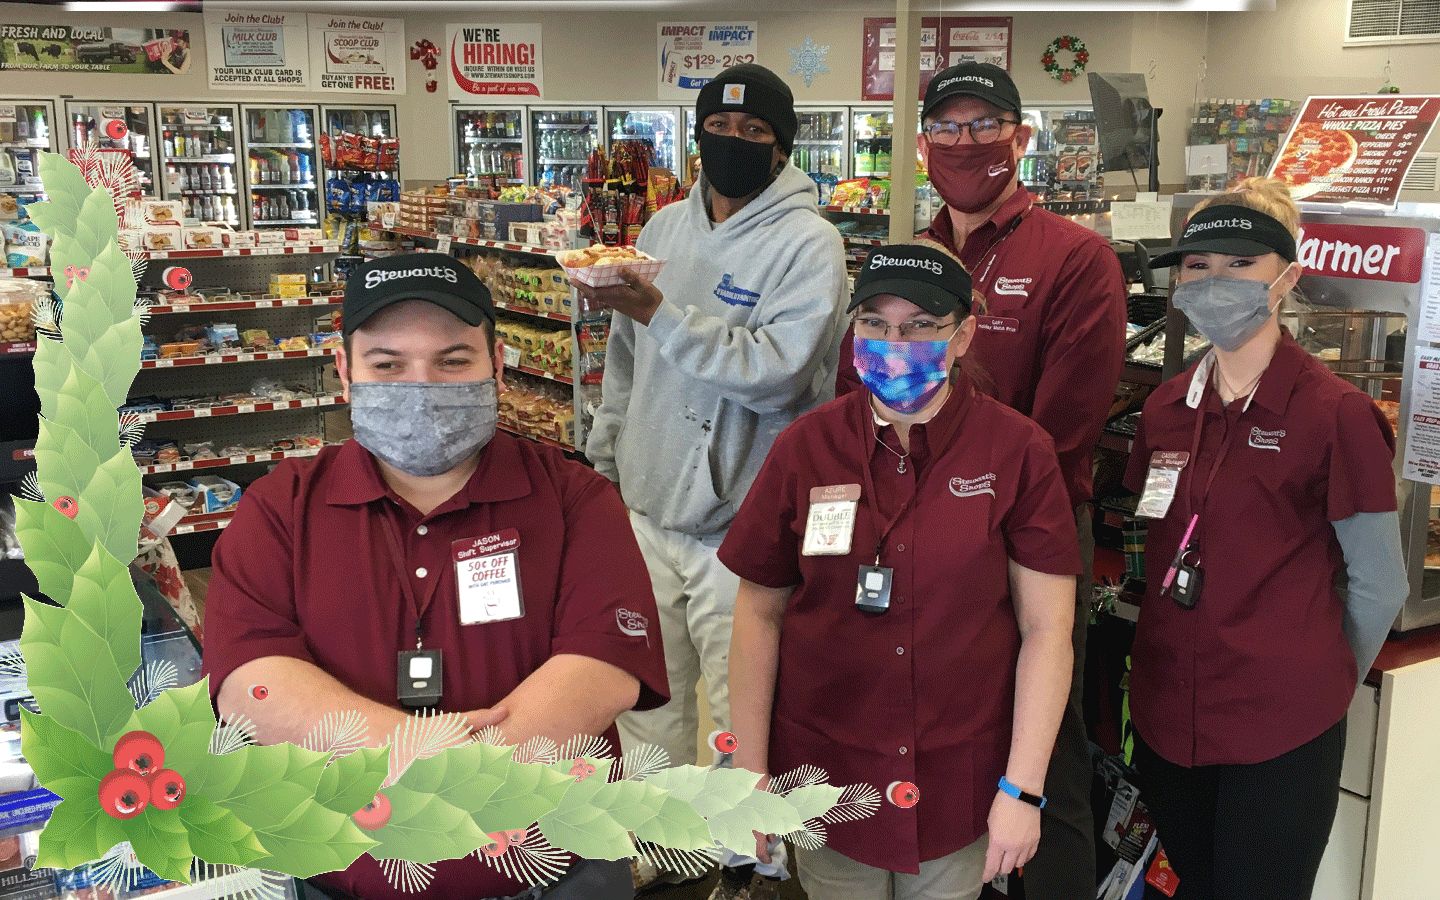 5 people in a stewarts shop. all wearing masks looking at the camera